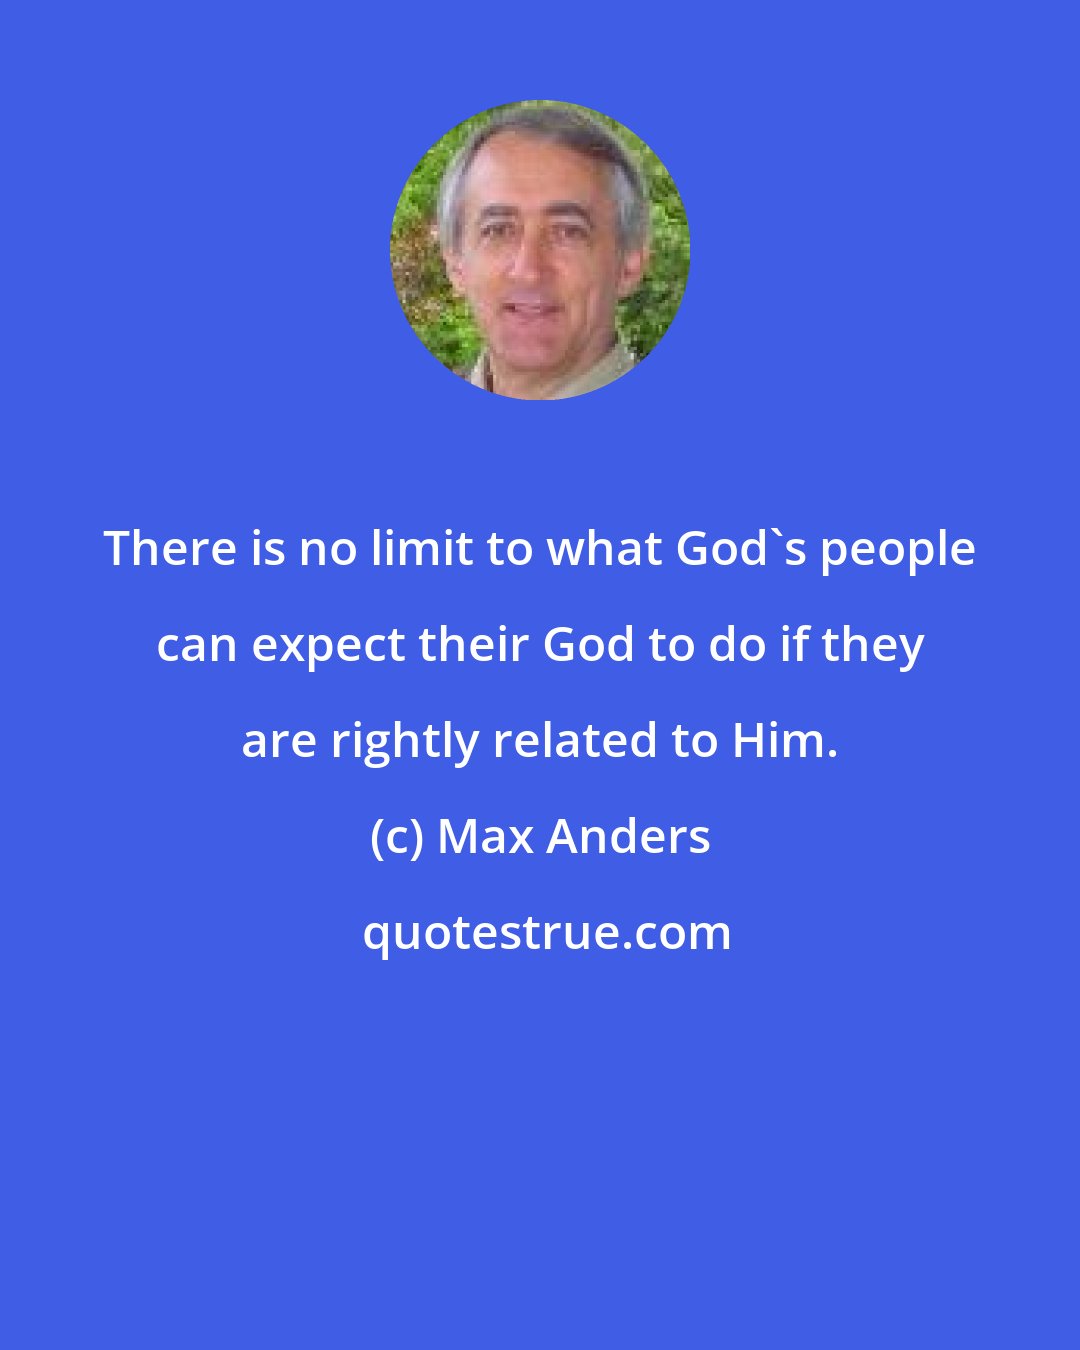 Max Anders: There is no limit to what God's people can expect their God to do if they are rightly related to Him.